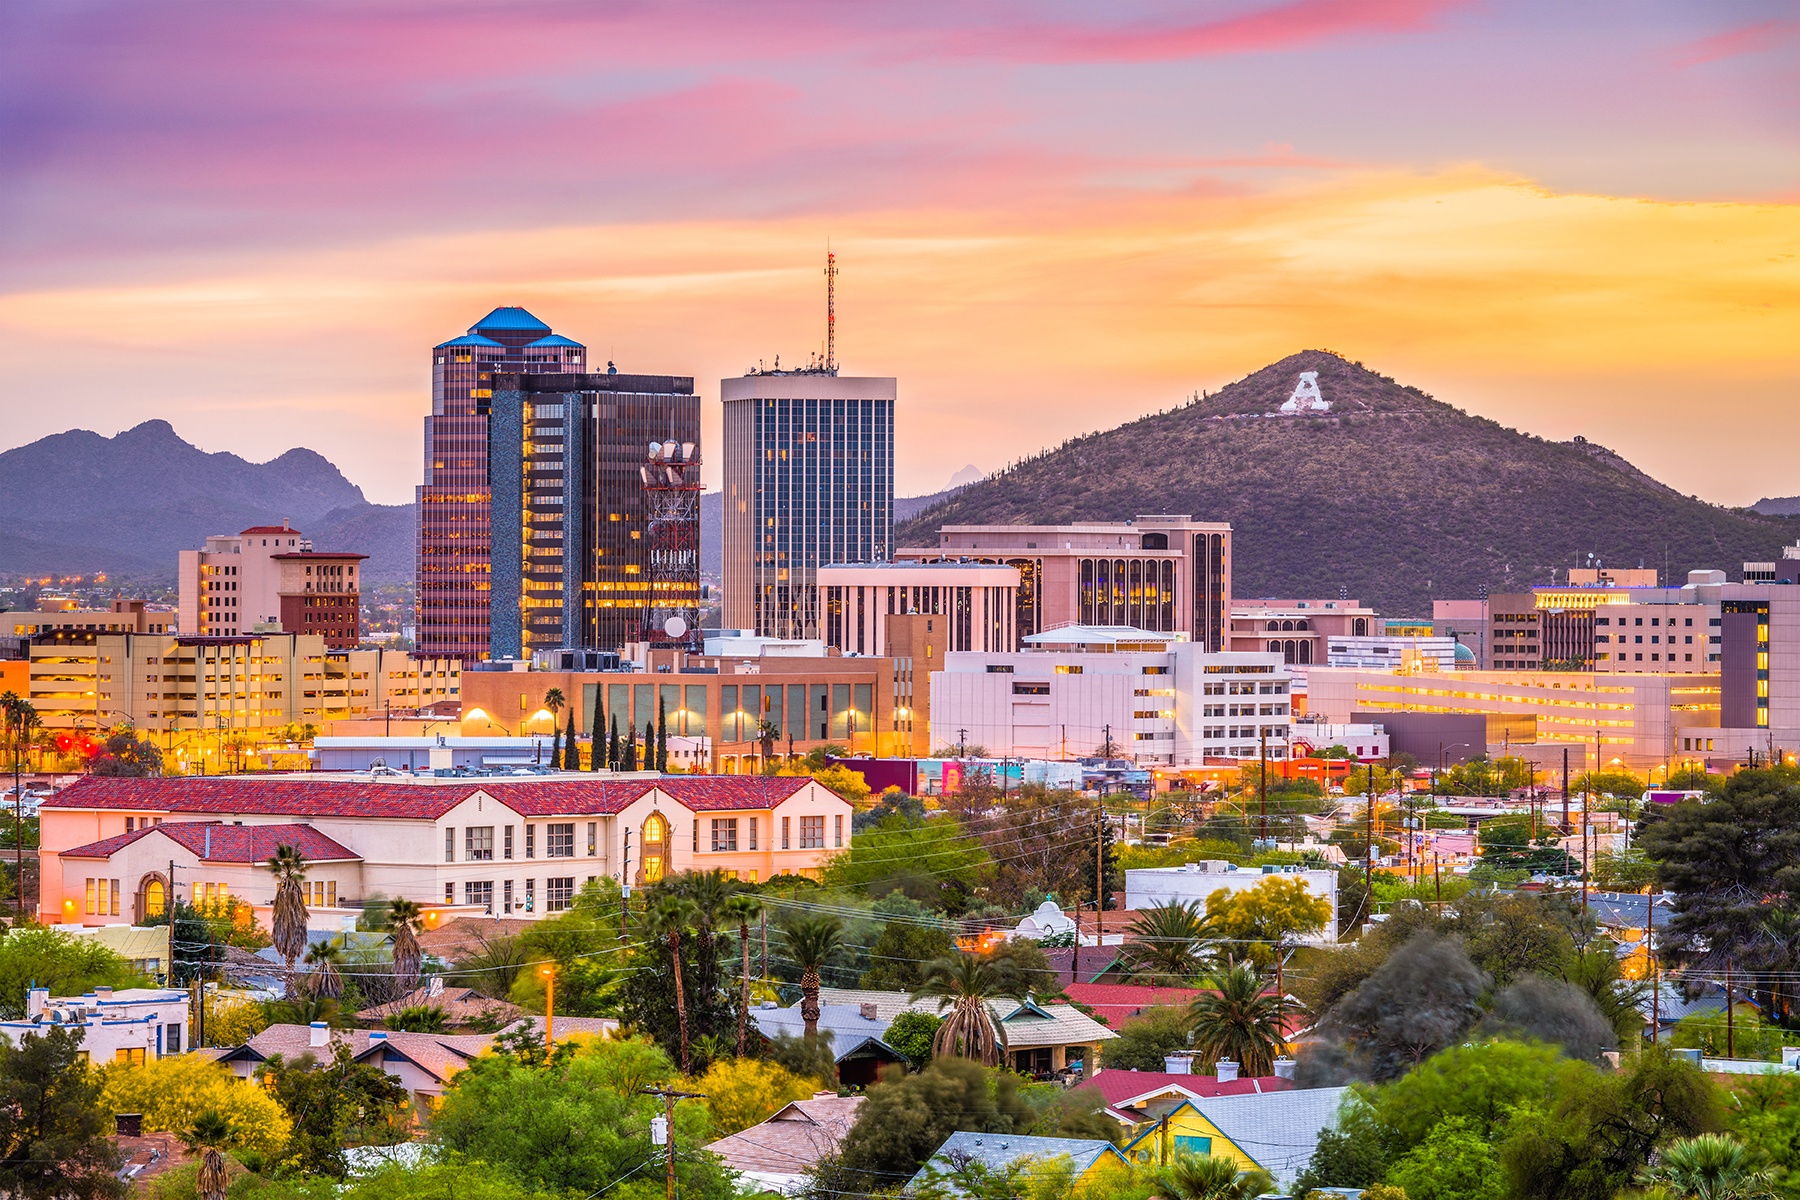 Tucson, Arizona is a great destination for RVers who love outdoor adventure and Mexican cuisine